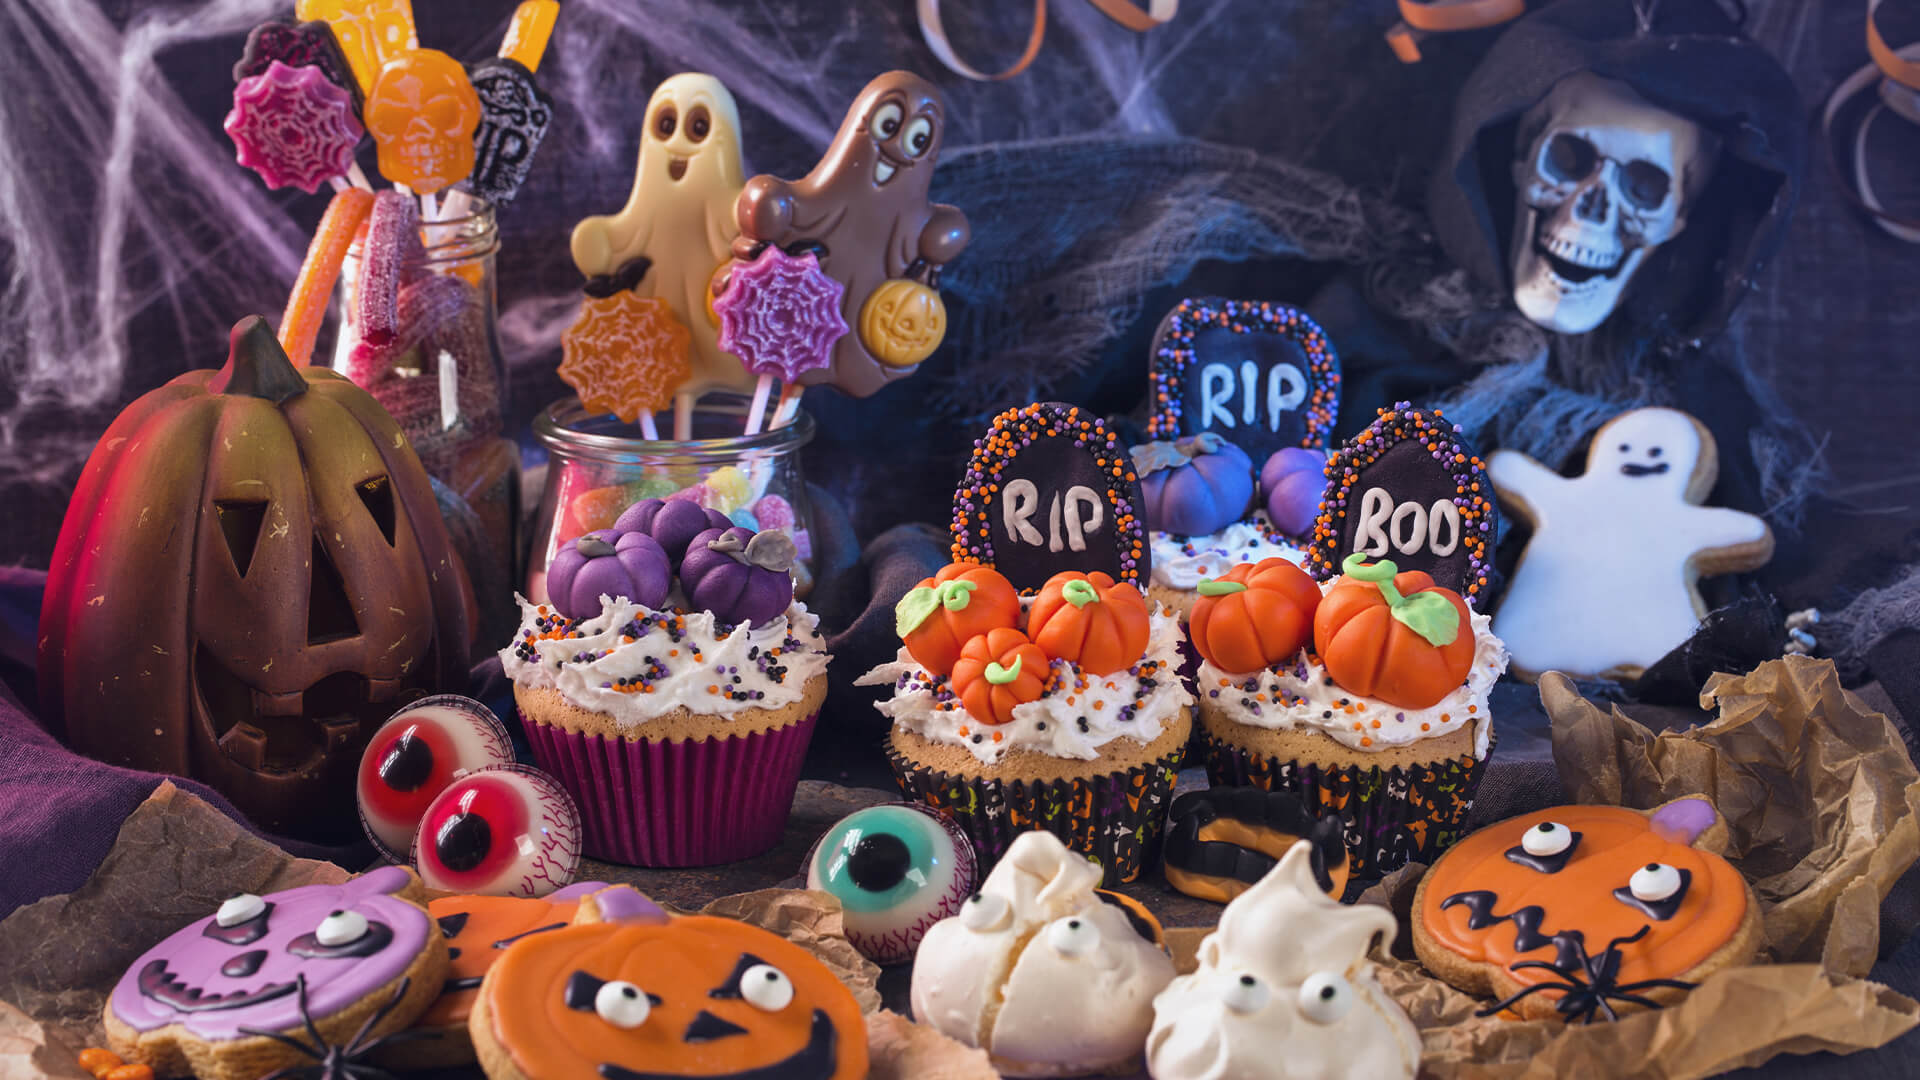 Halloween decorated cakes and biscuits with a spooky purple background